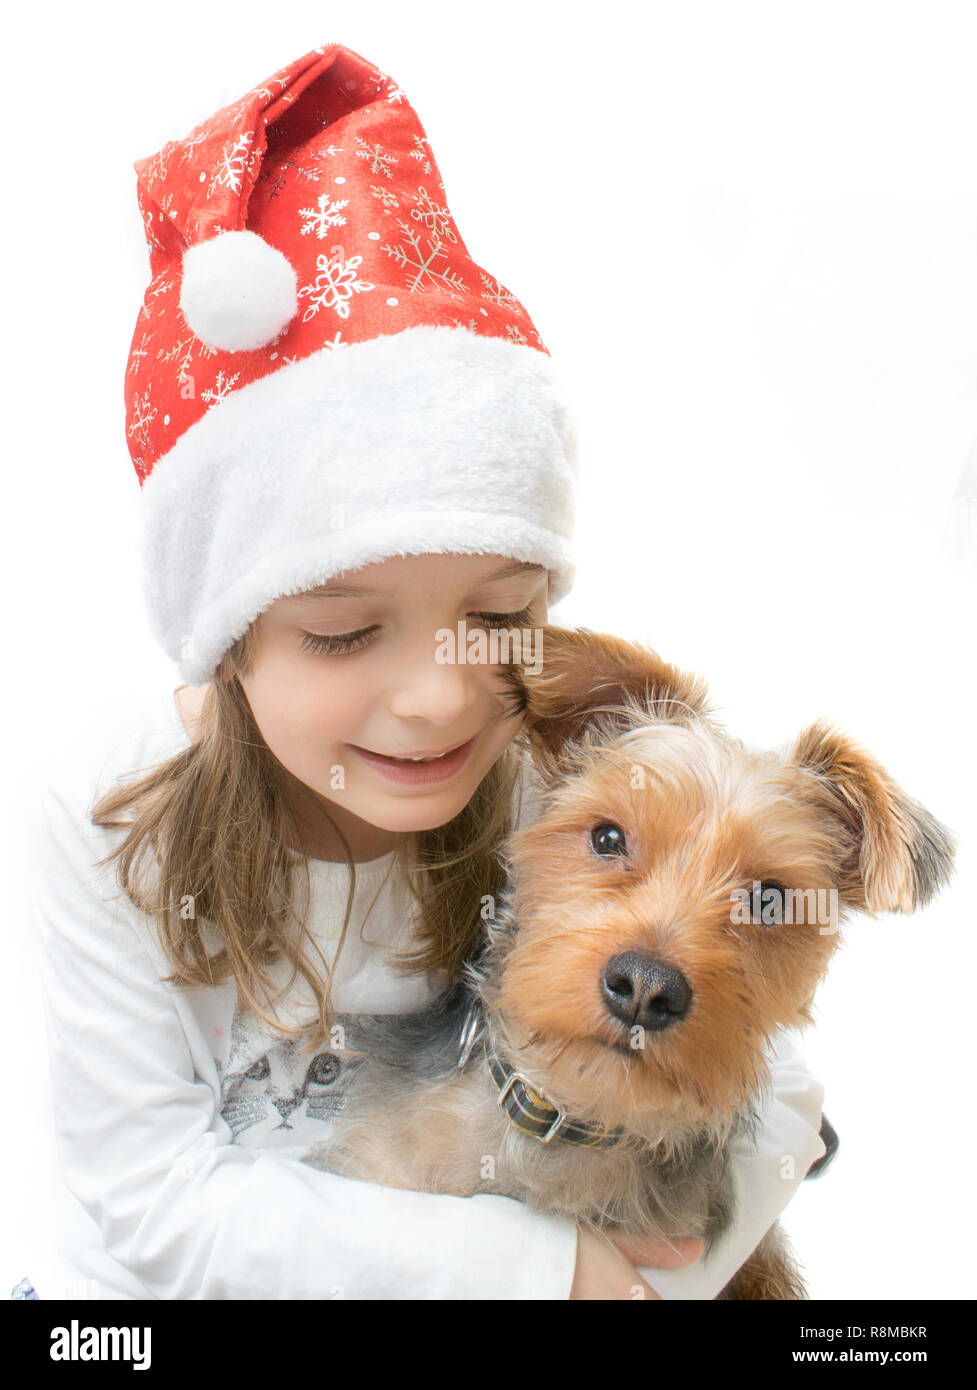 A cute little girl wearing a Santa hat, holding an adorable Yorkshire Terrier Puppy. Stock Photo